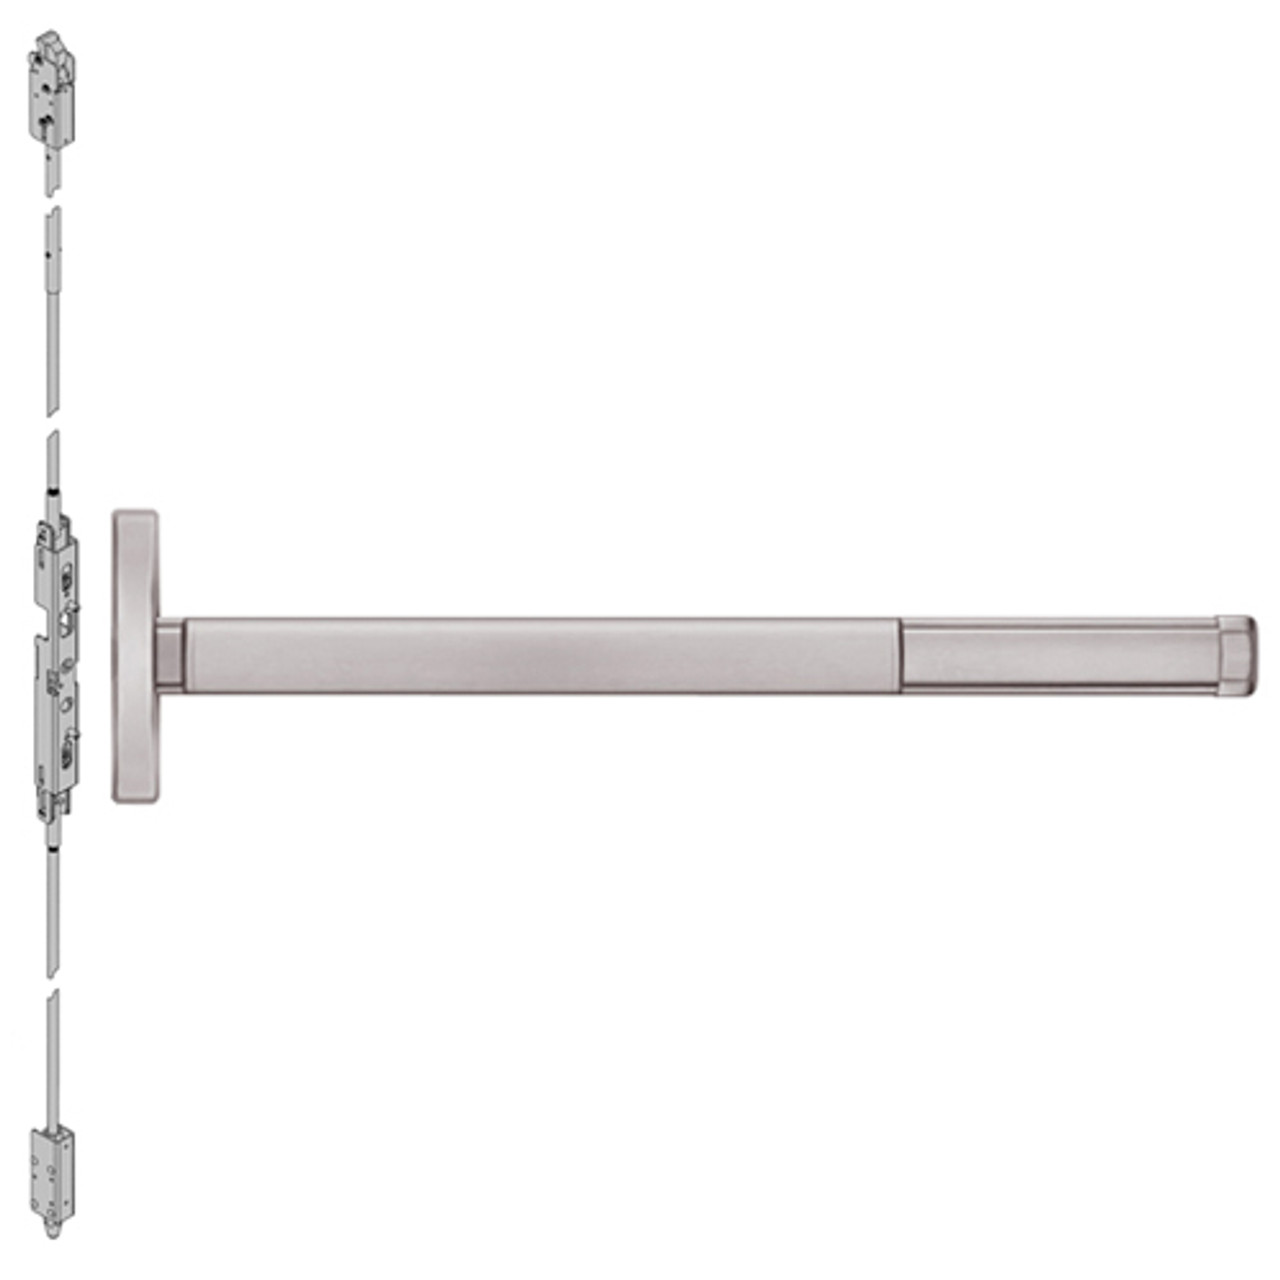 DE2602-628-48 PHI 2600 Series Concealed Vertical Rod Exit Device with Delayed Egress Prepped for Dummy Trim in Satin Aluminum Finish